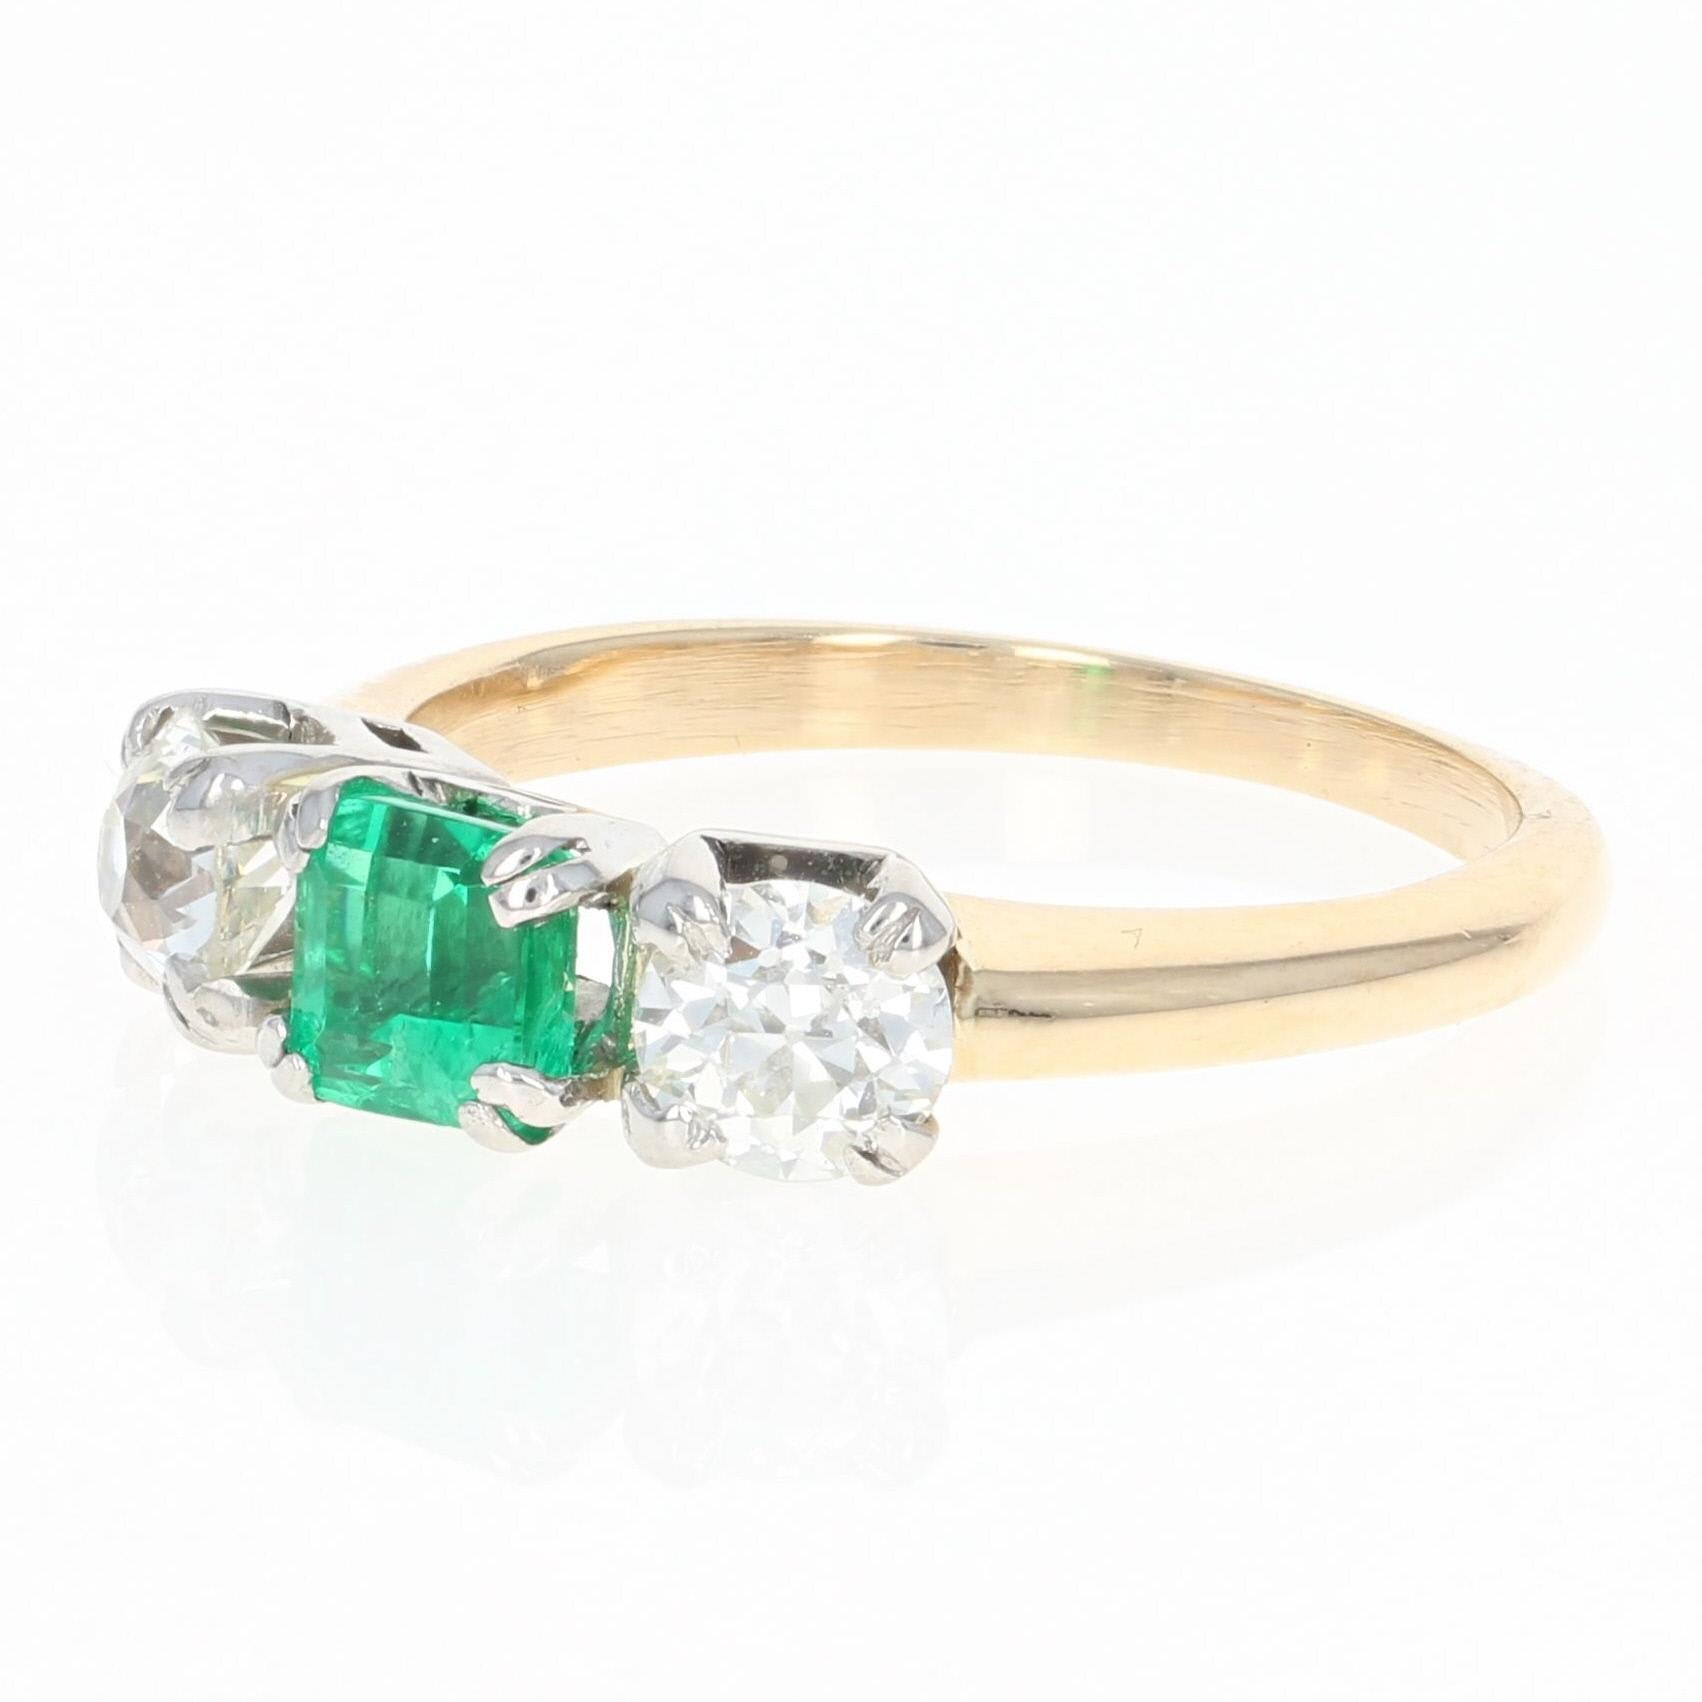 Capture a part of the Art Deco Era’s vivacious style with this gorgeous ring! Composed of 14k yellow and white gold and fashioned in a three-stone design, this piece showcases a radiant emerald flanked by two sparkling diamonds. This stunning